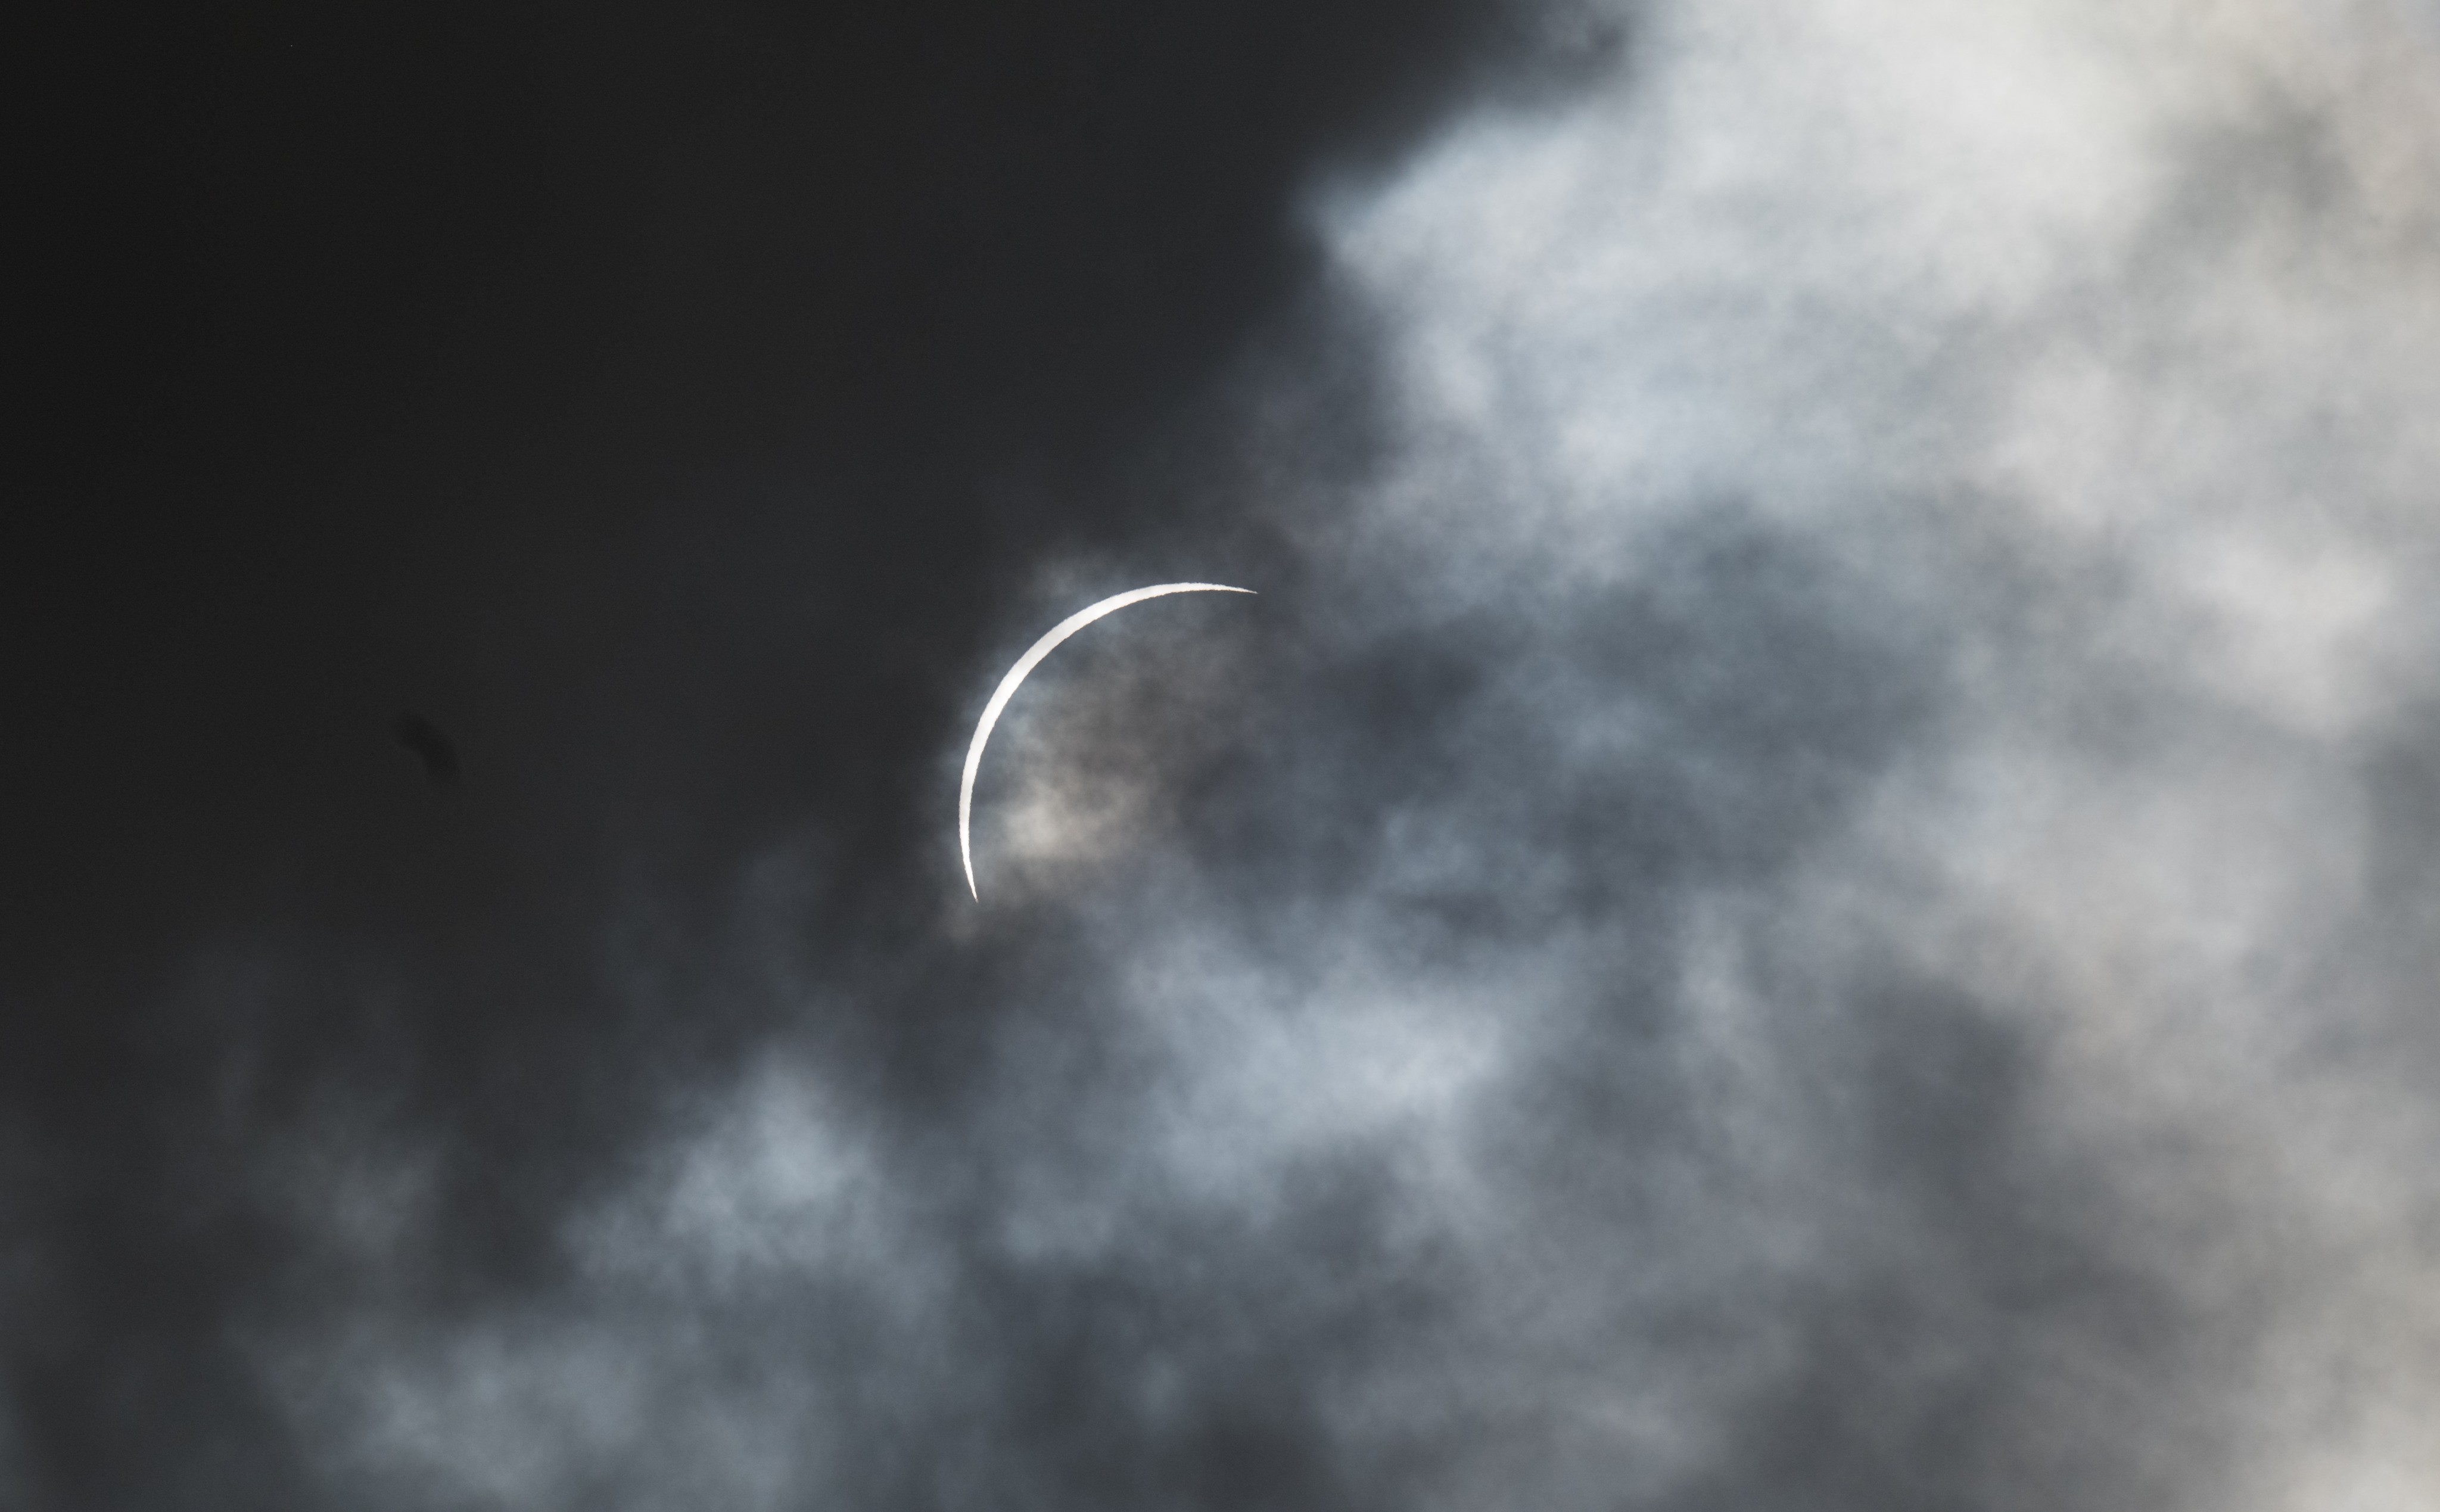 A crescent of the Sun emerges from behind clouds.